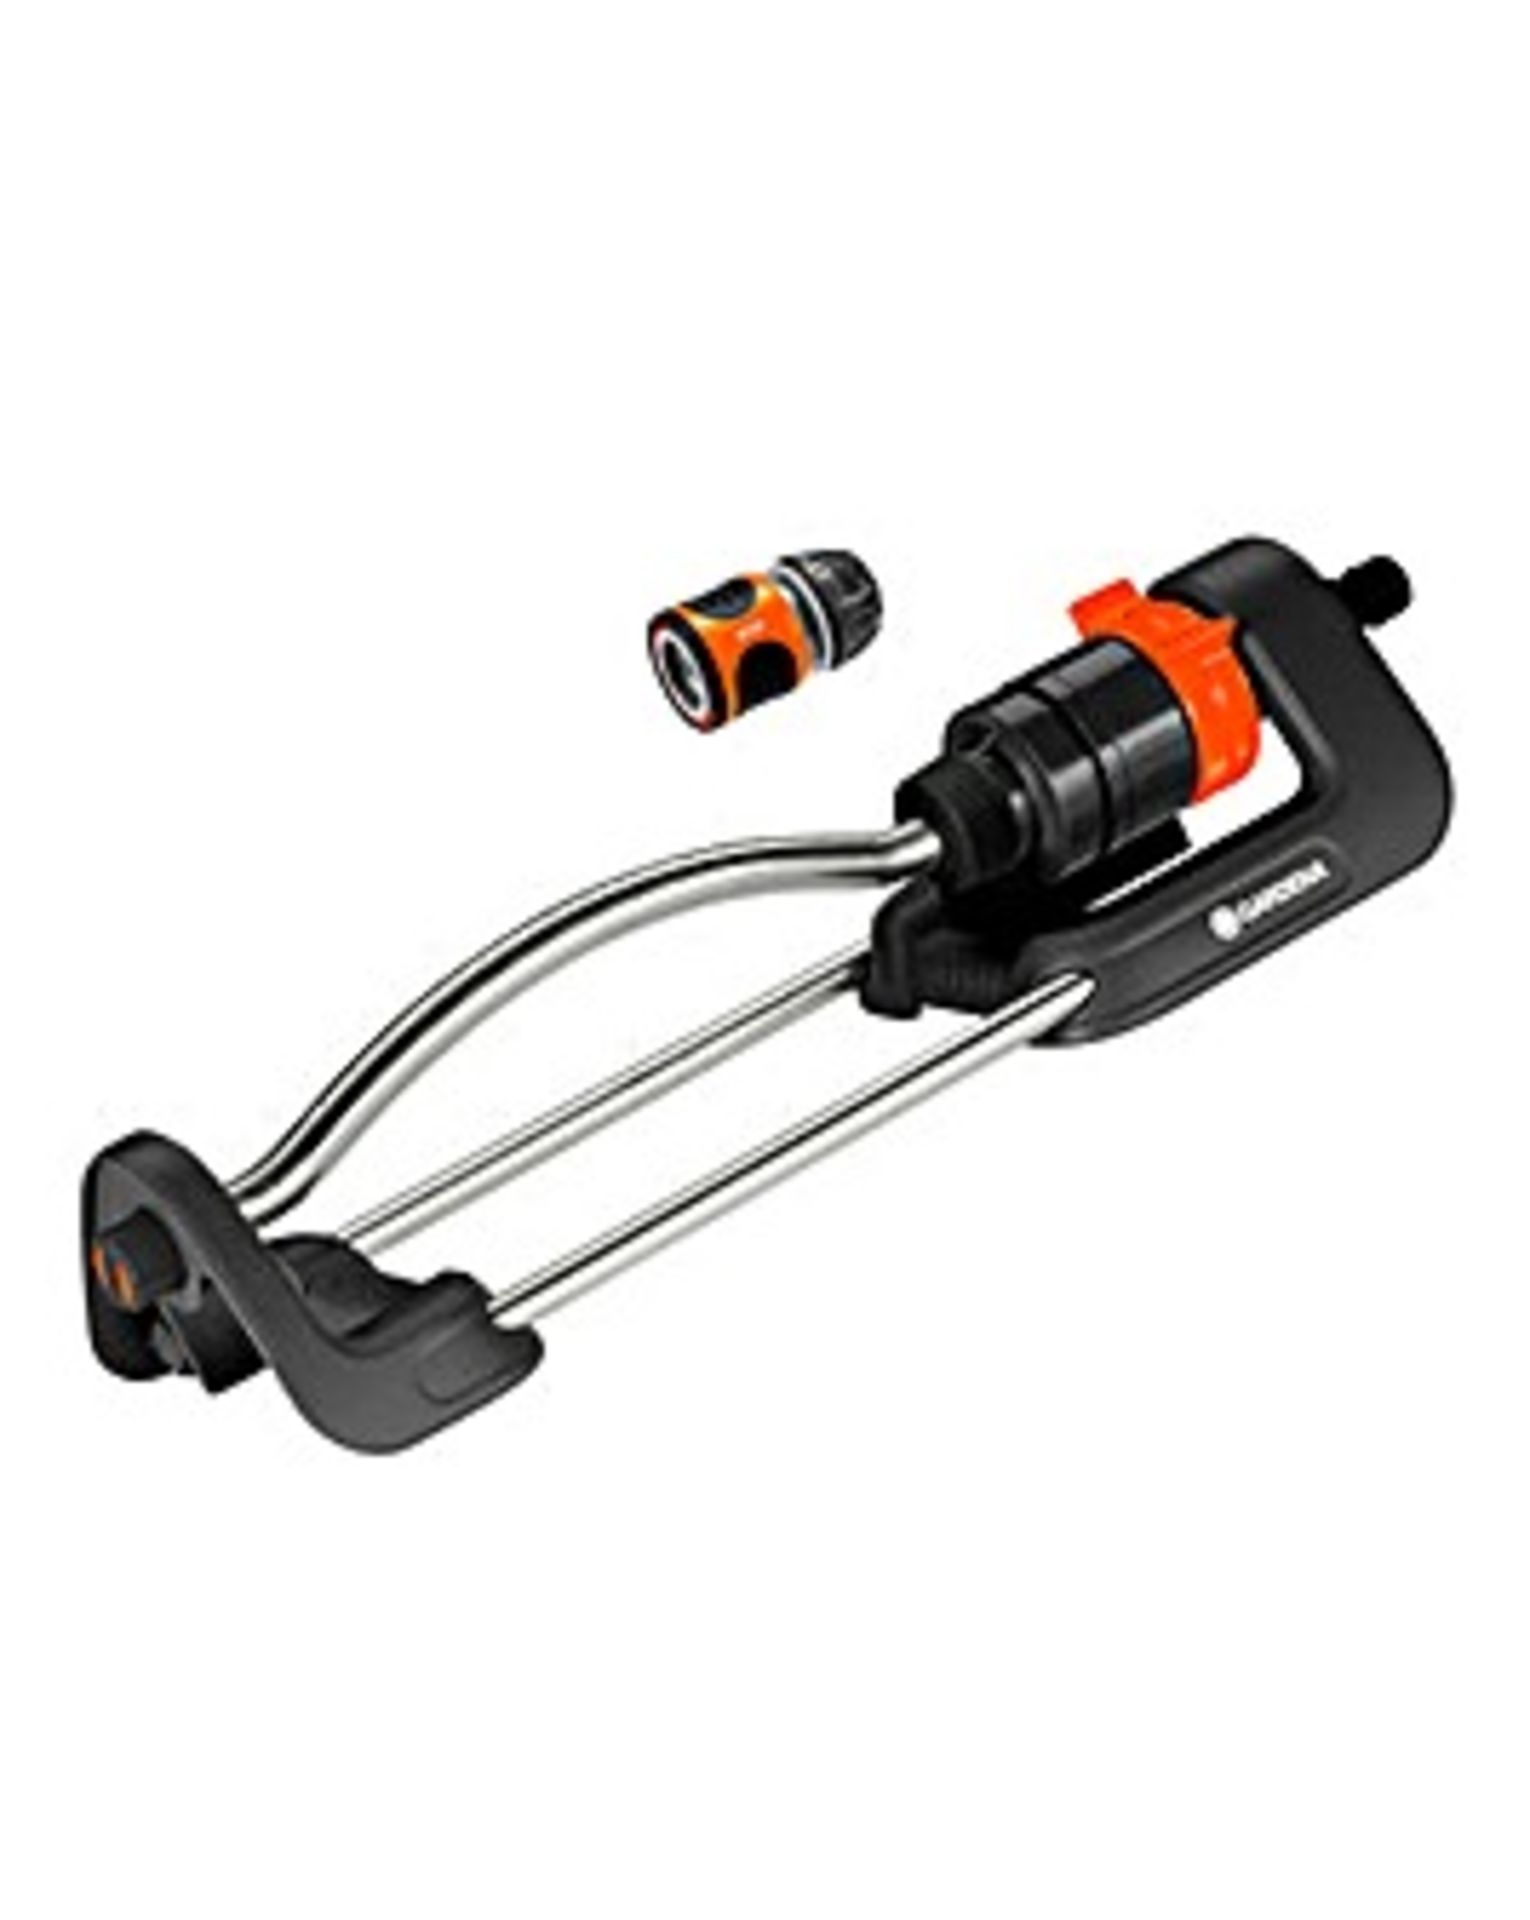 Gardena Classic Oscillating Sprinkler Polo 220 with Free Connector BX861601 RRP £ 21.99